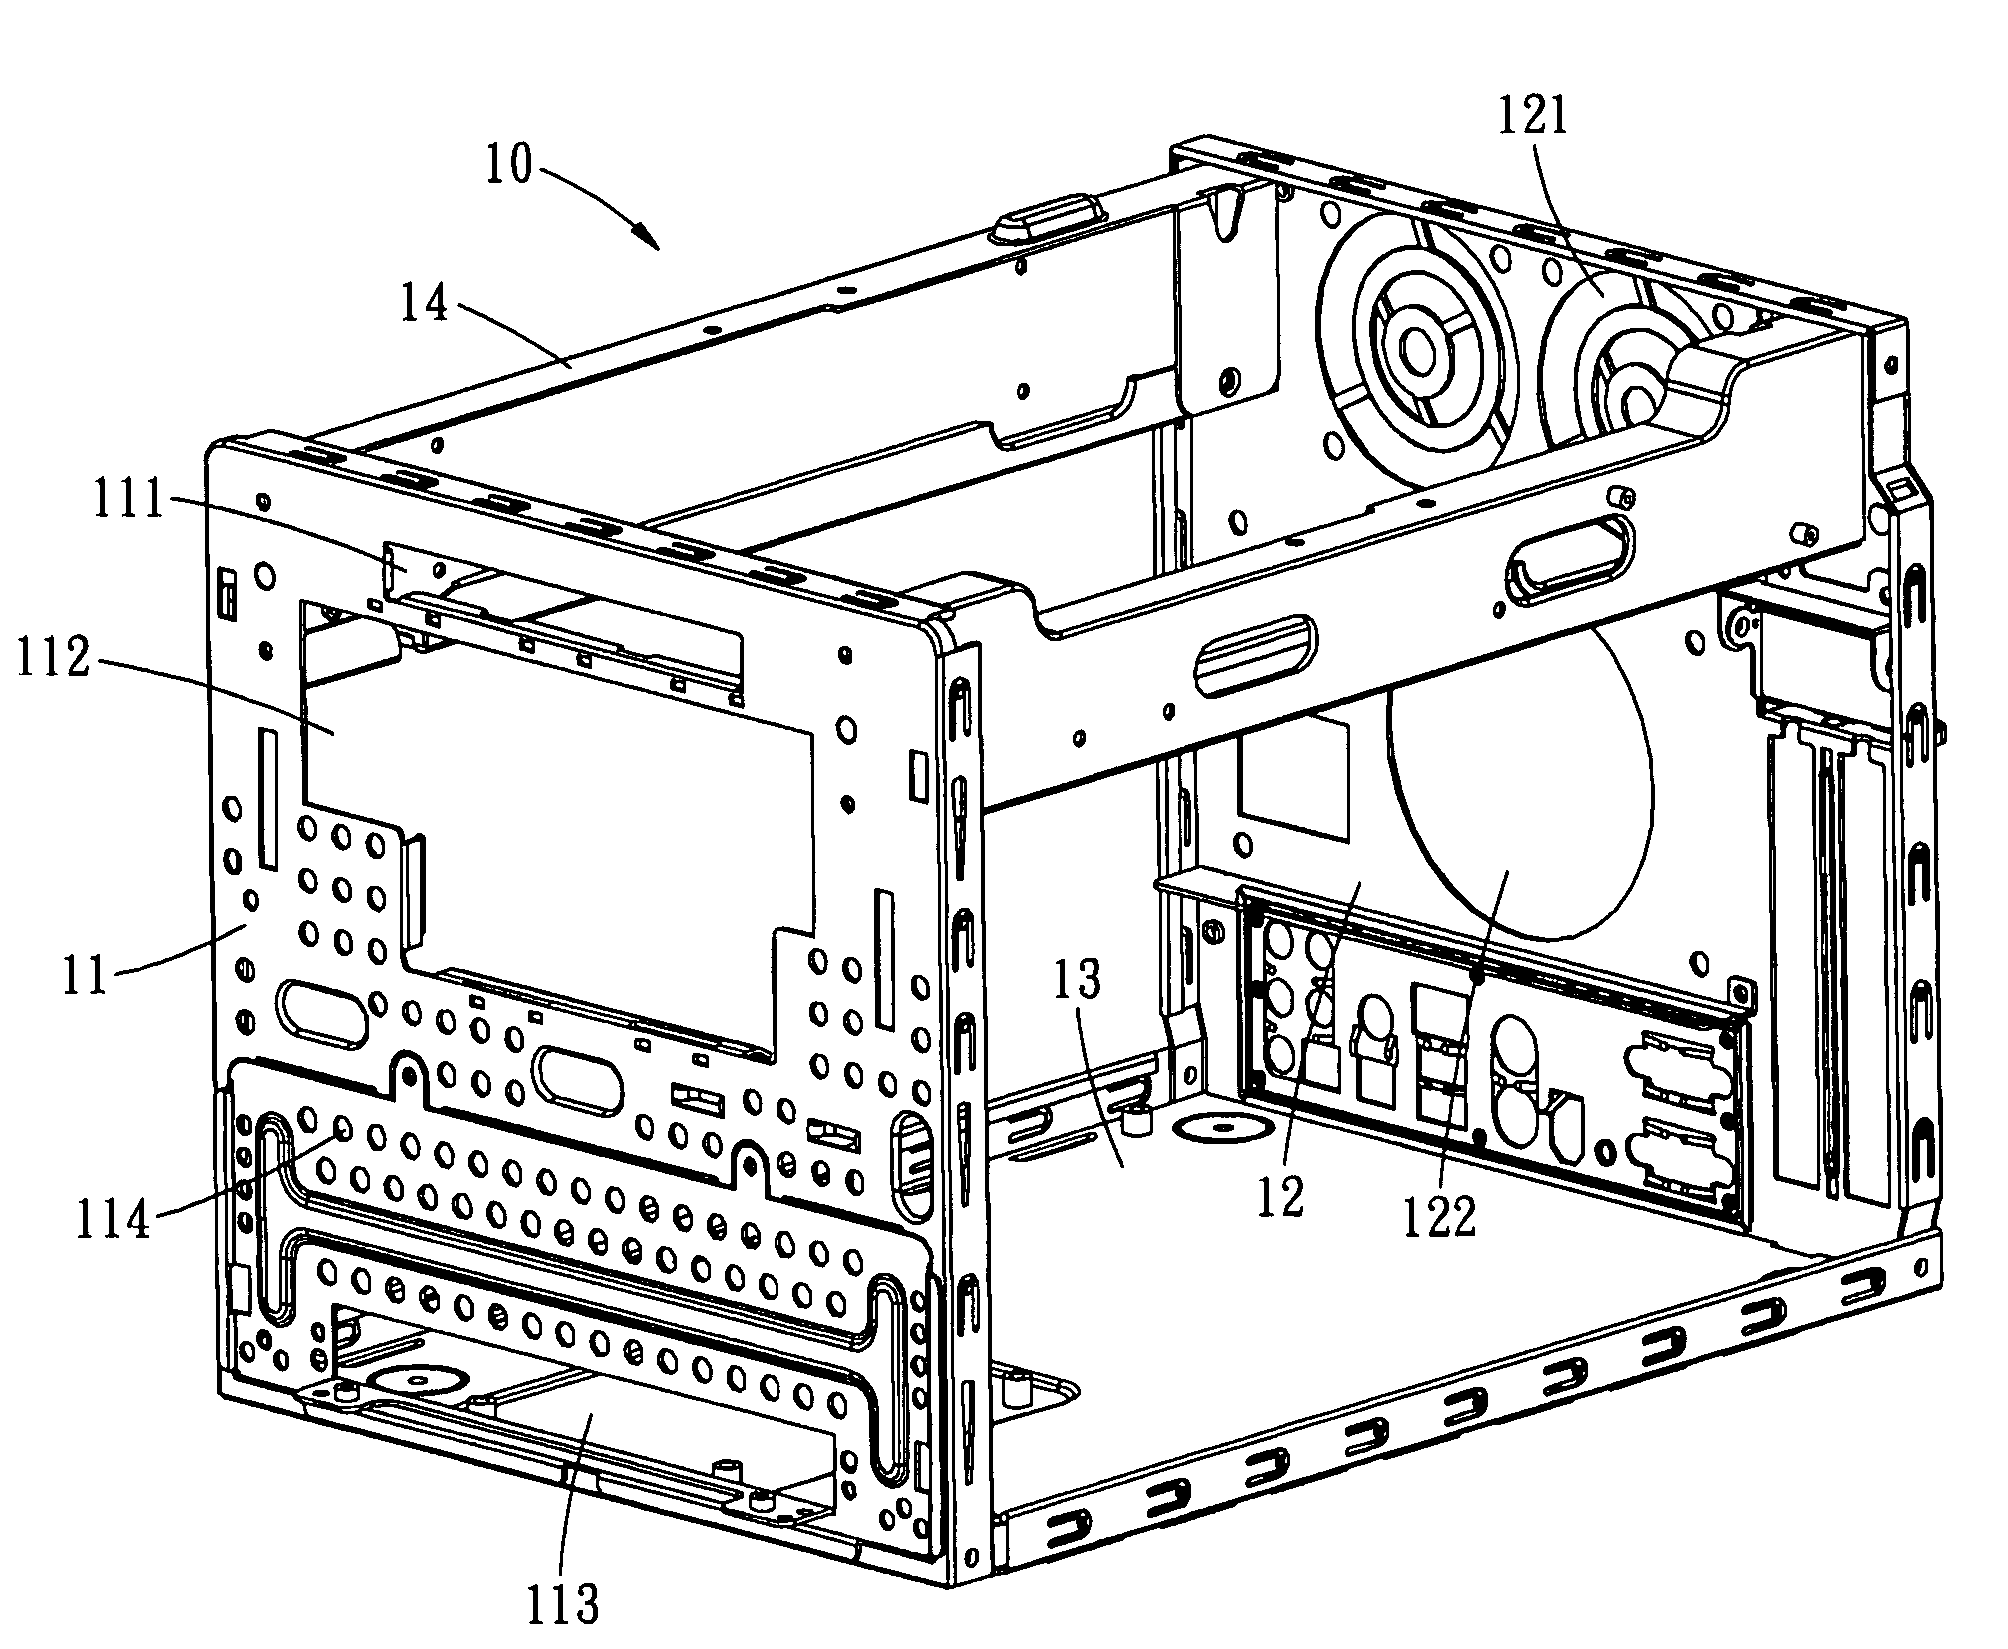 Heat dissipating structure for computer casing